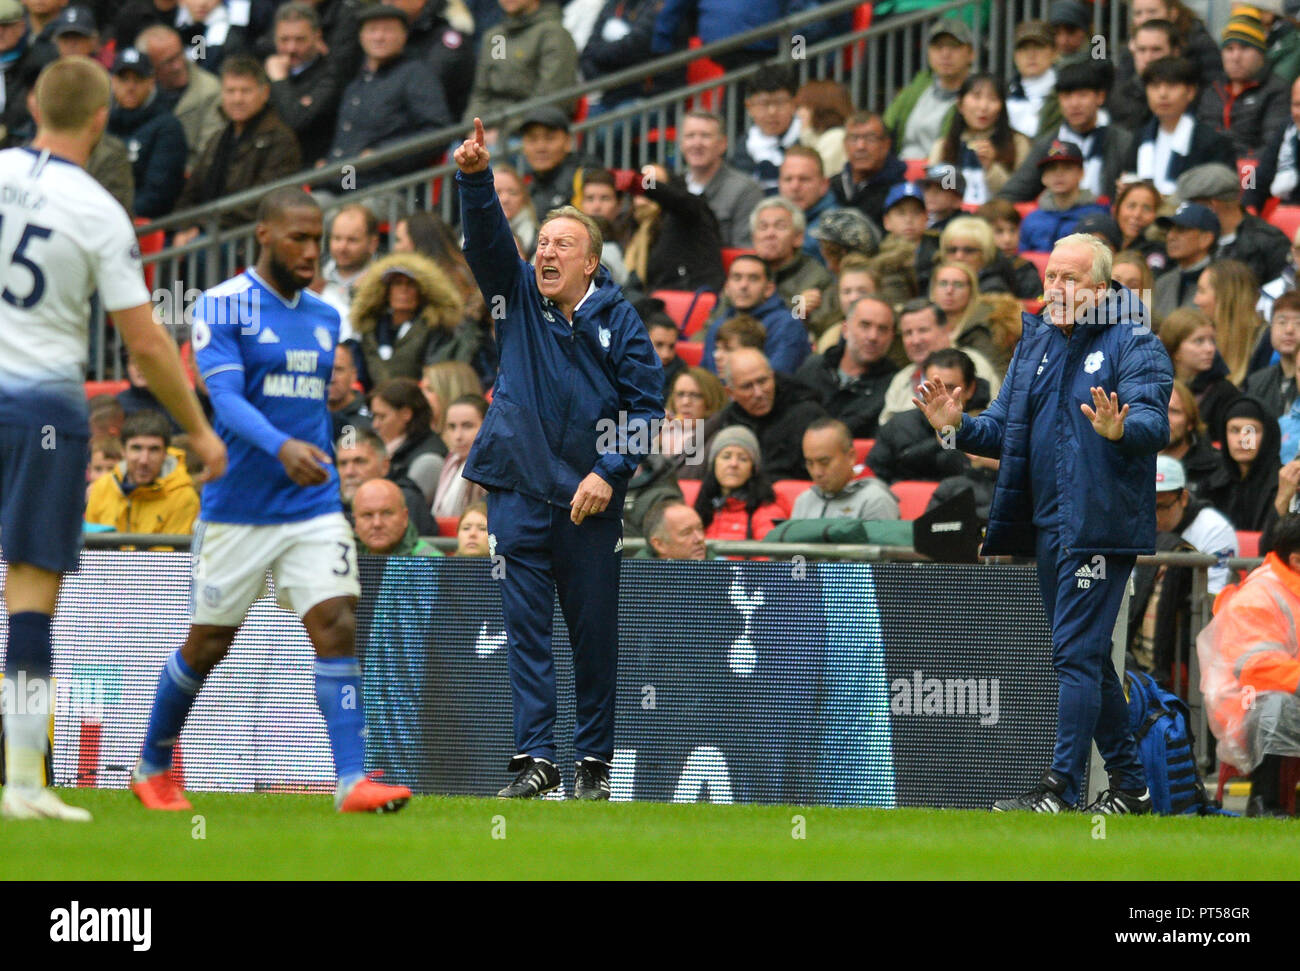 London, UK. 6th Oct, 2018. Cardiff City manager Neil Warnock (2nd R) gestures during the English Premier League match between Tottenham Hotspur and Cardiff City at the Wembley Stadium in London, Britain on Oct. 6, 2018. Tottenham won 1-0. Credit: Marek Dorcik/Xinhua/Alamy Live News Stock Photo